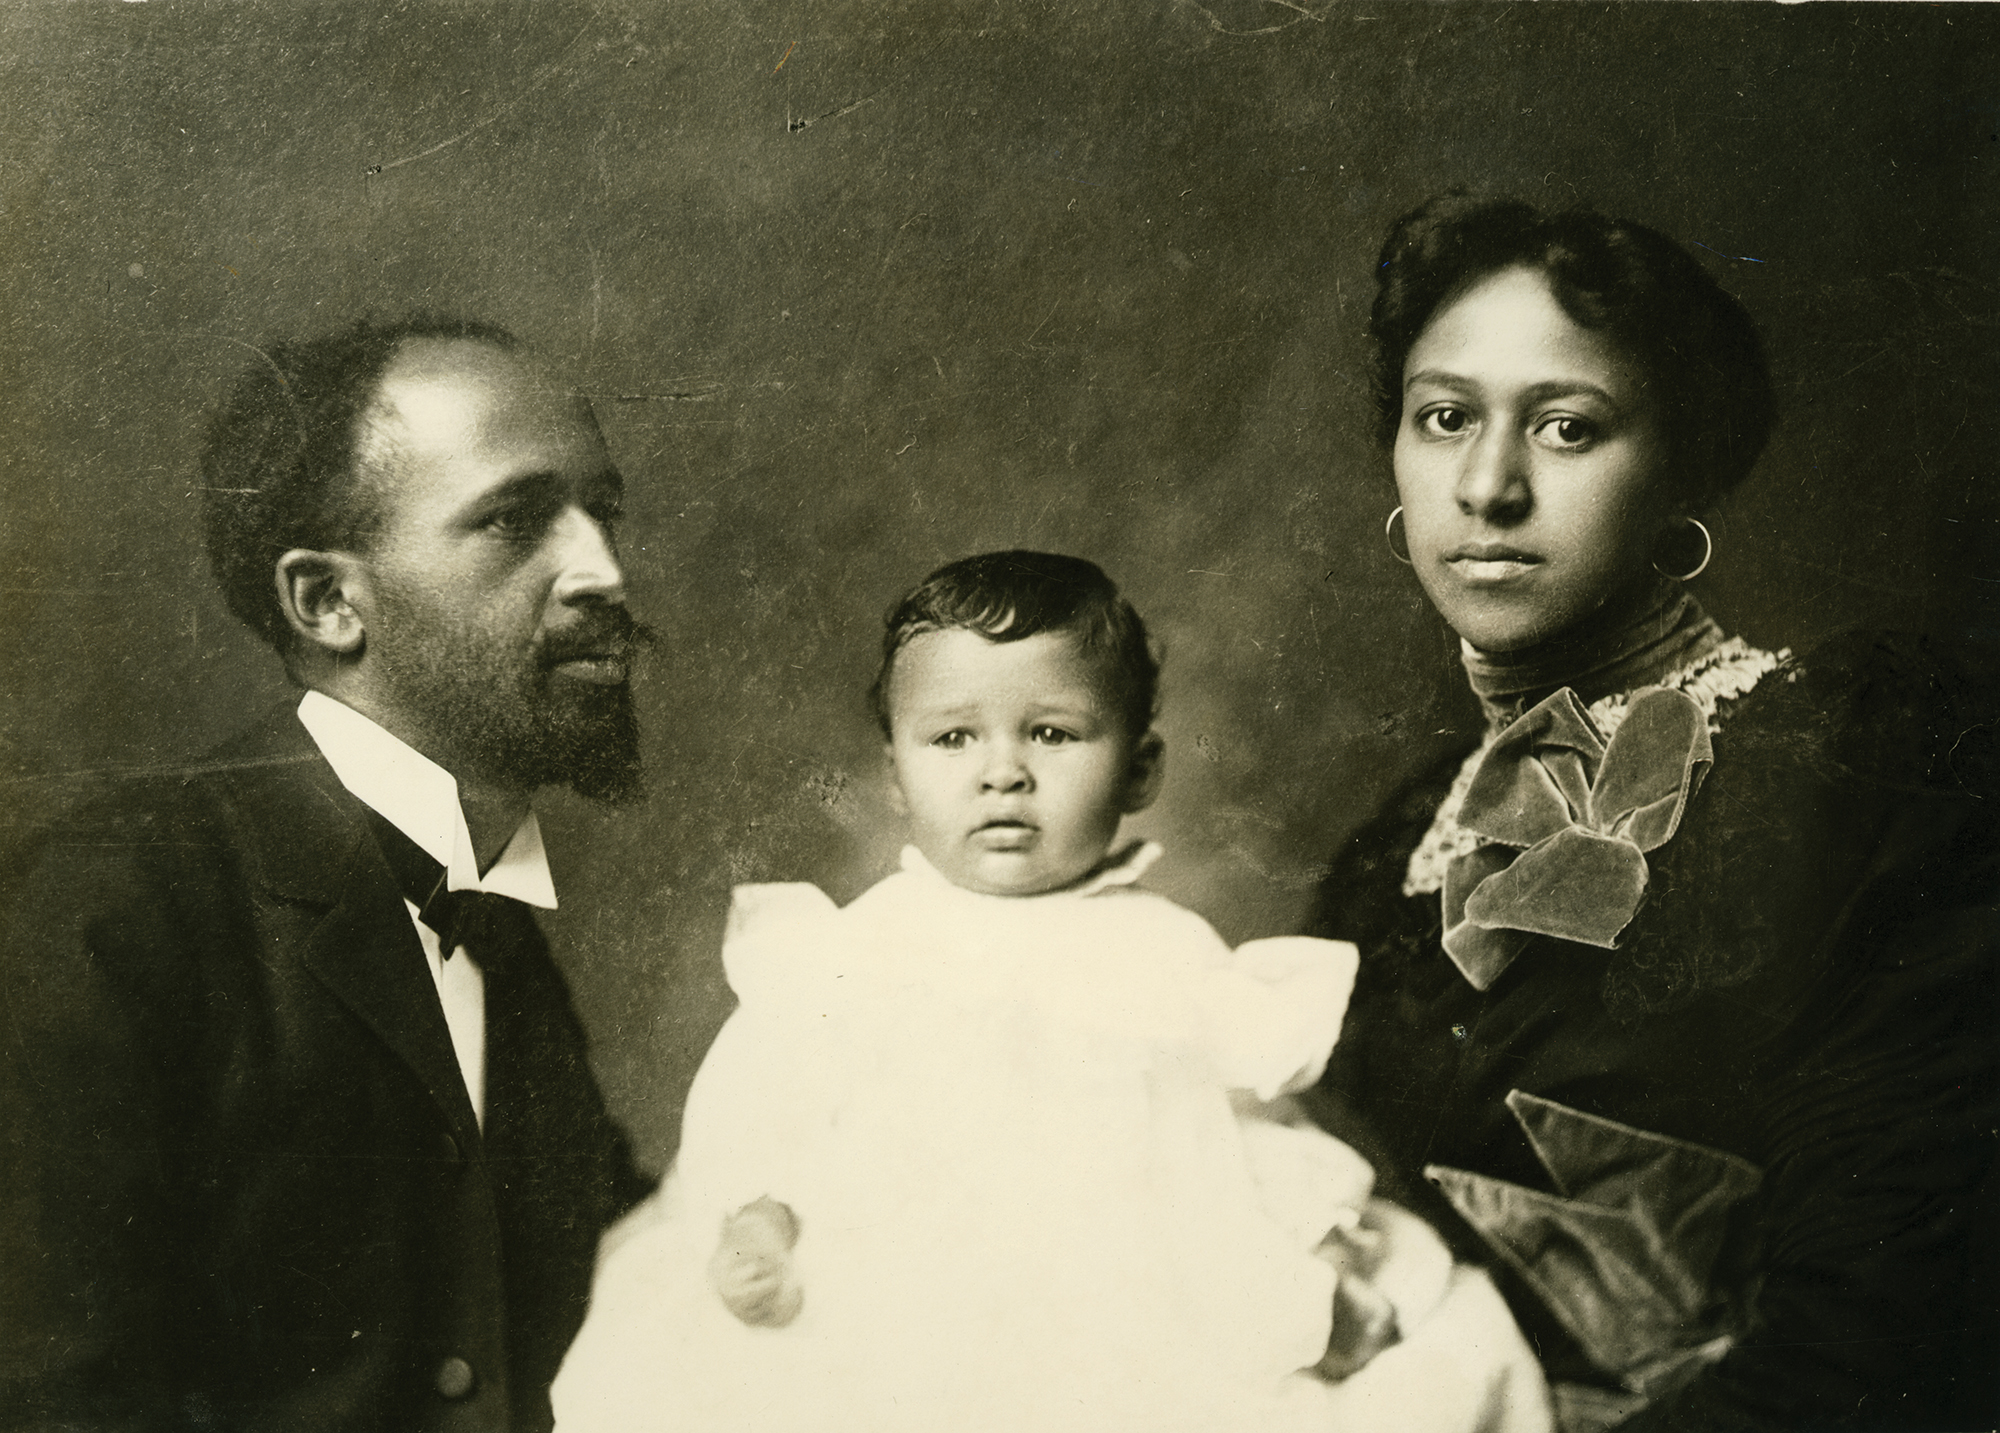 W.E.B. Du Bois, his son, and his wife.